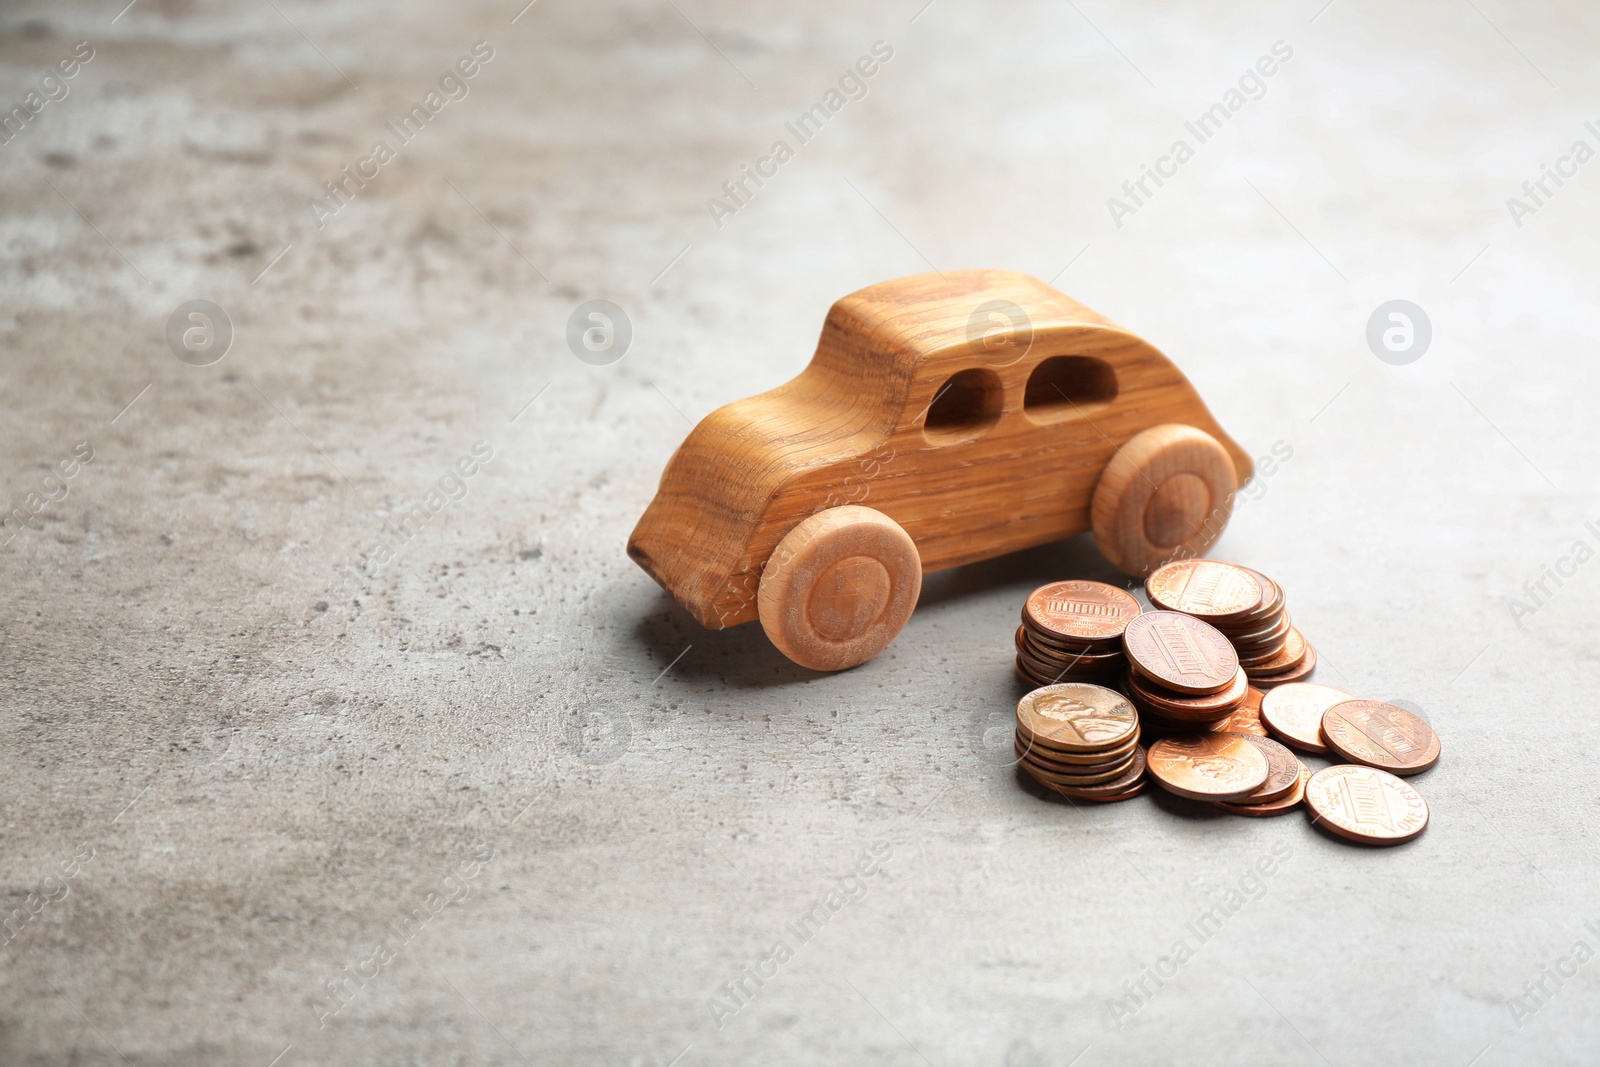 Photo of Wooden car model and coins on grey background. Space for text